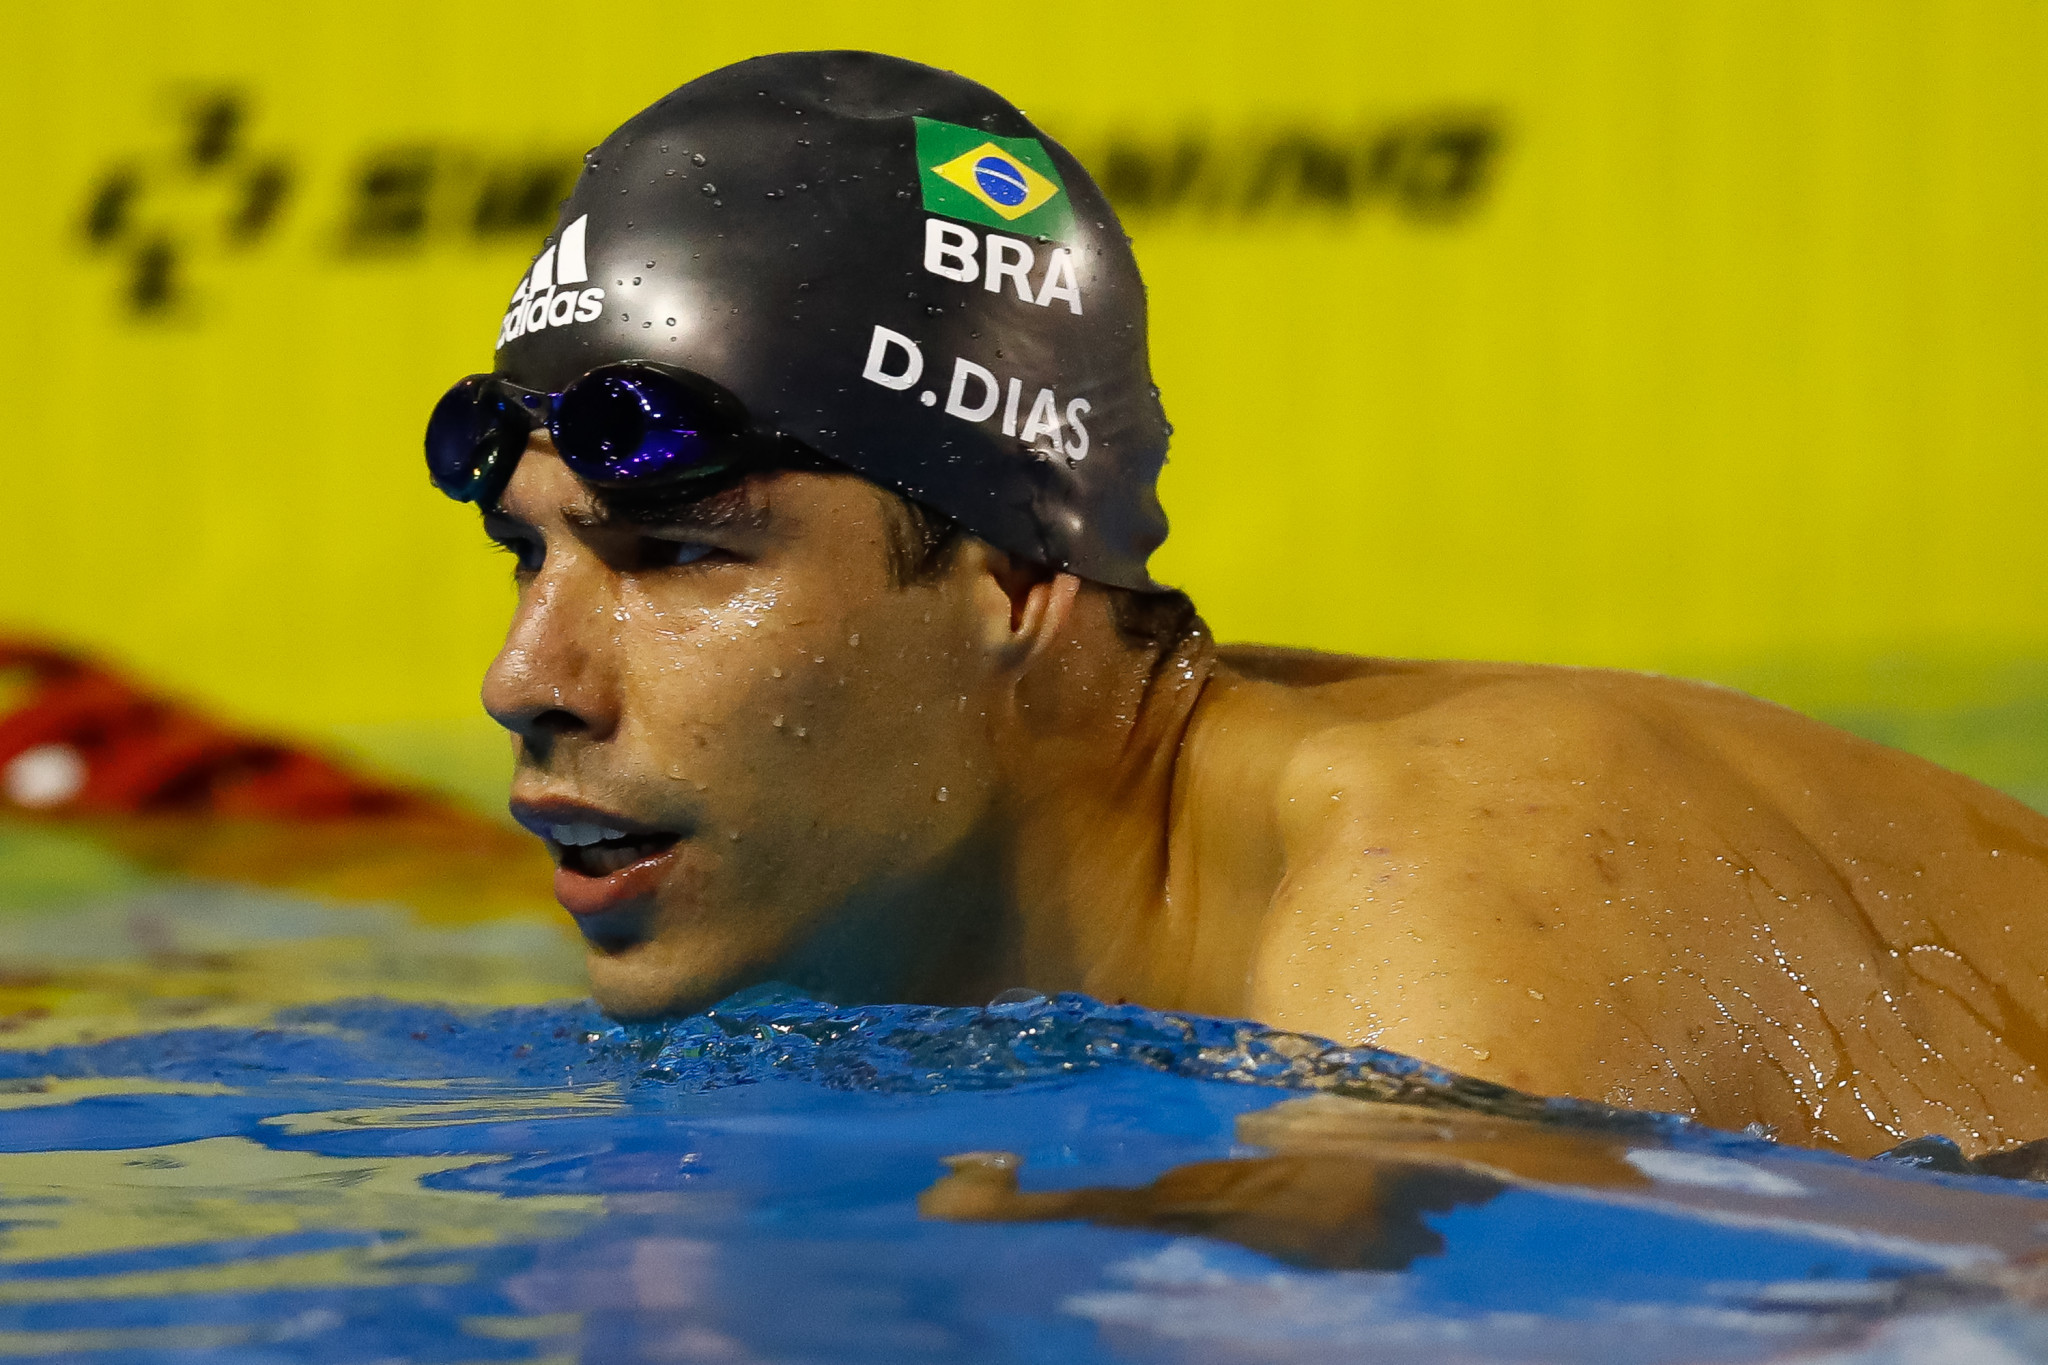 Brazilian star Dias breaks world record to claim gold at World Para Swimming World Series event in Sheffield